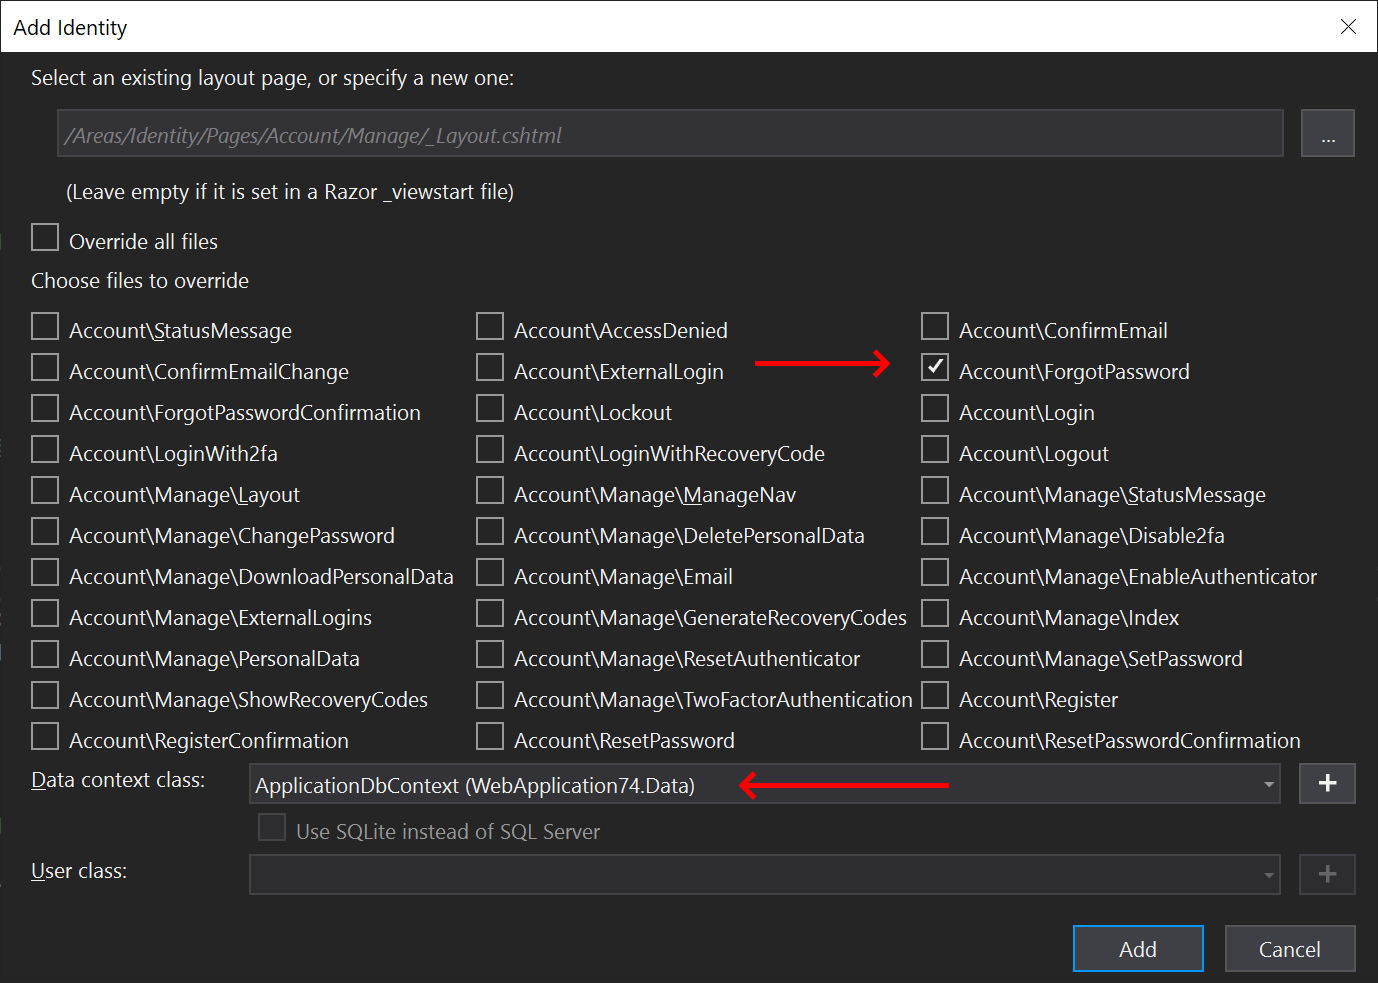 Select files to generate